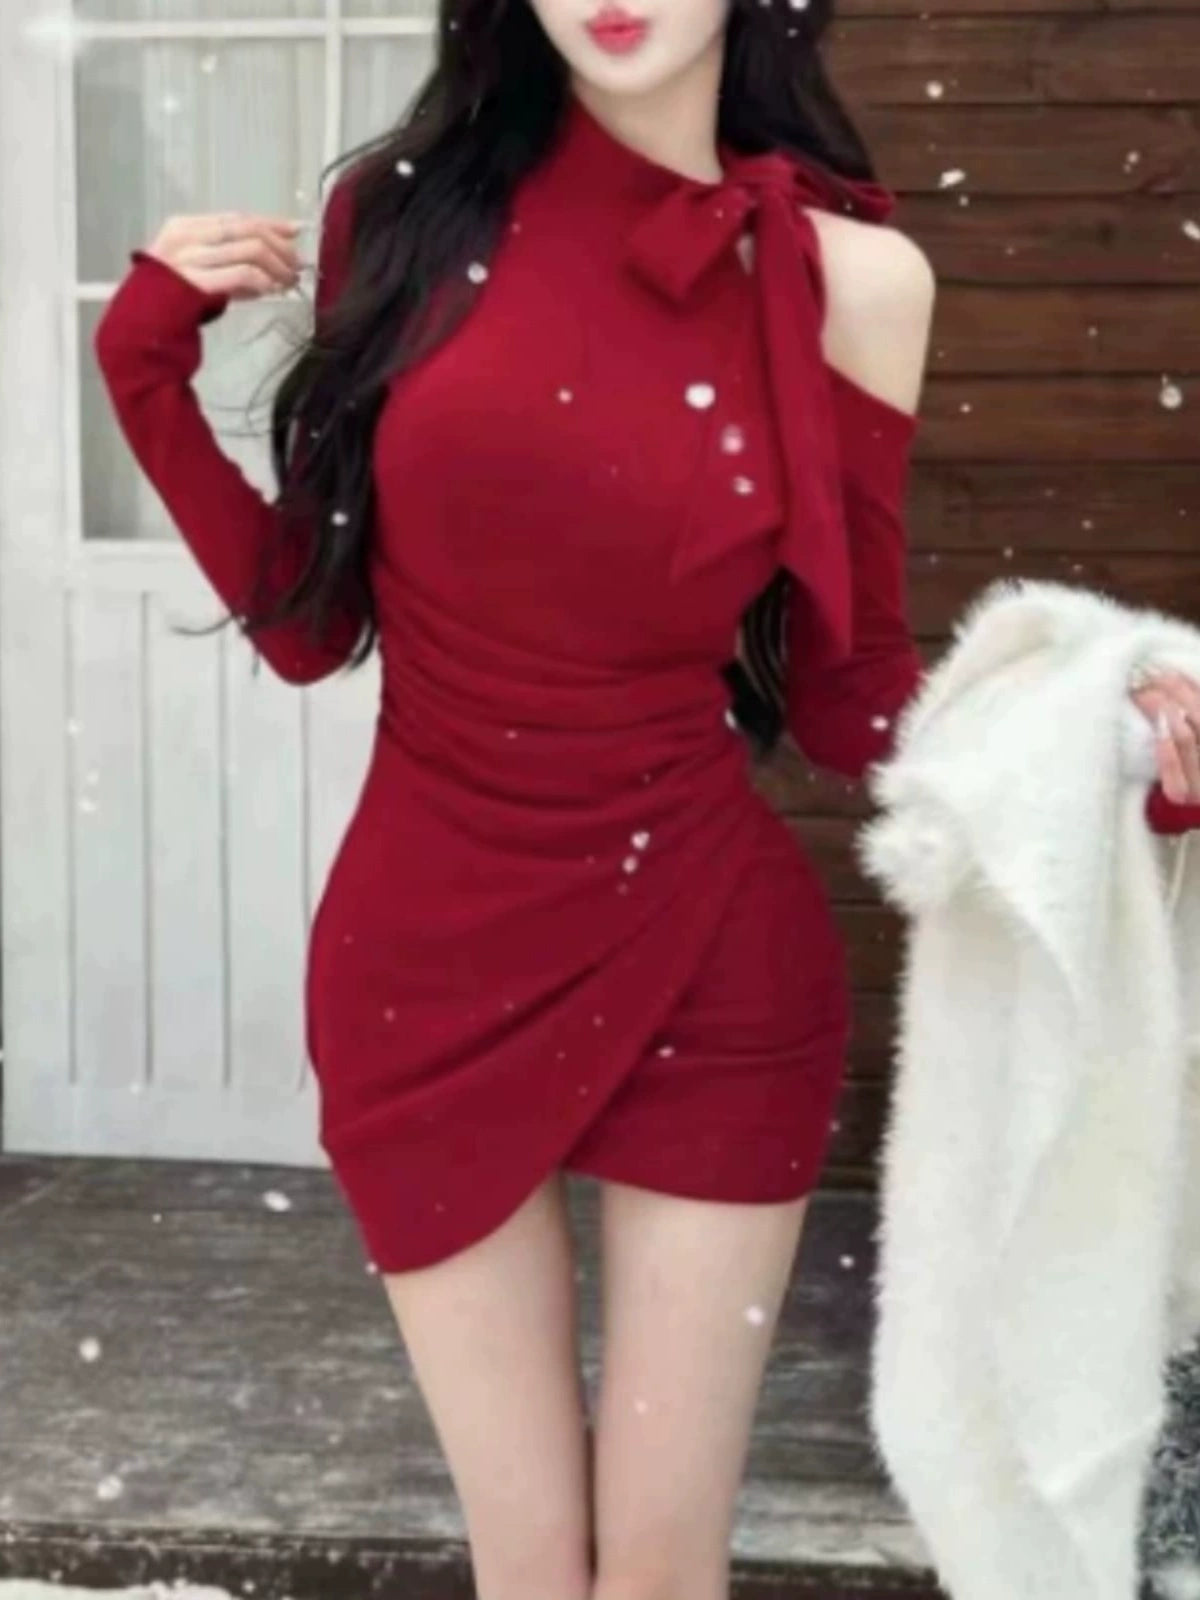 Plus Size Ladies Sexy A-Line Dress with Bows: Chic Winter Fashion